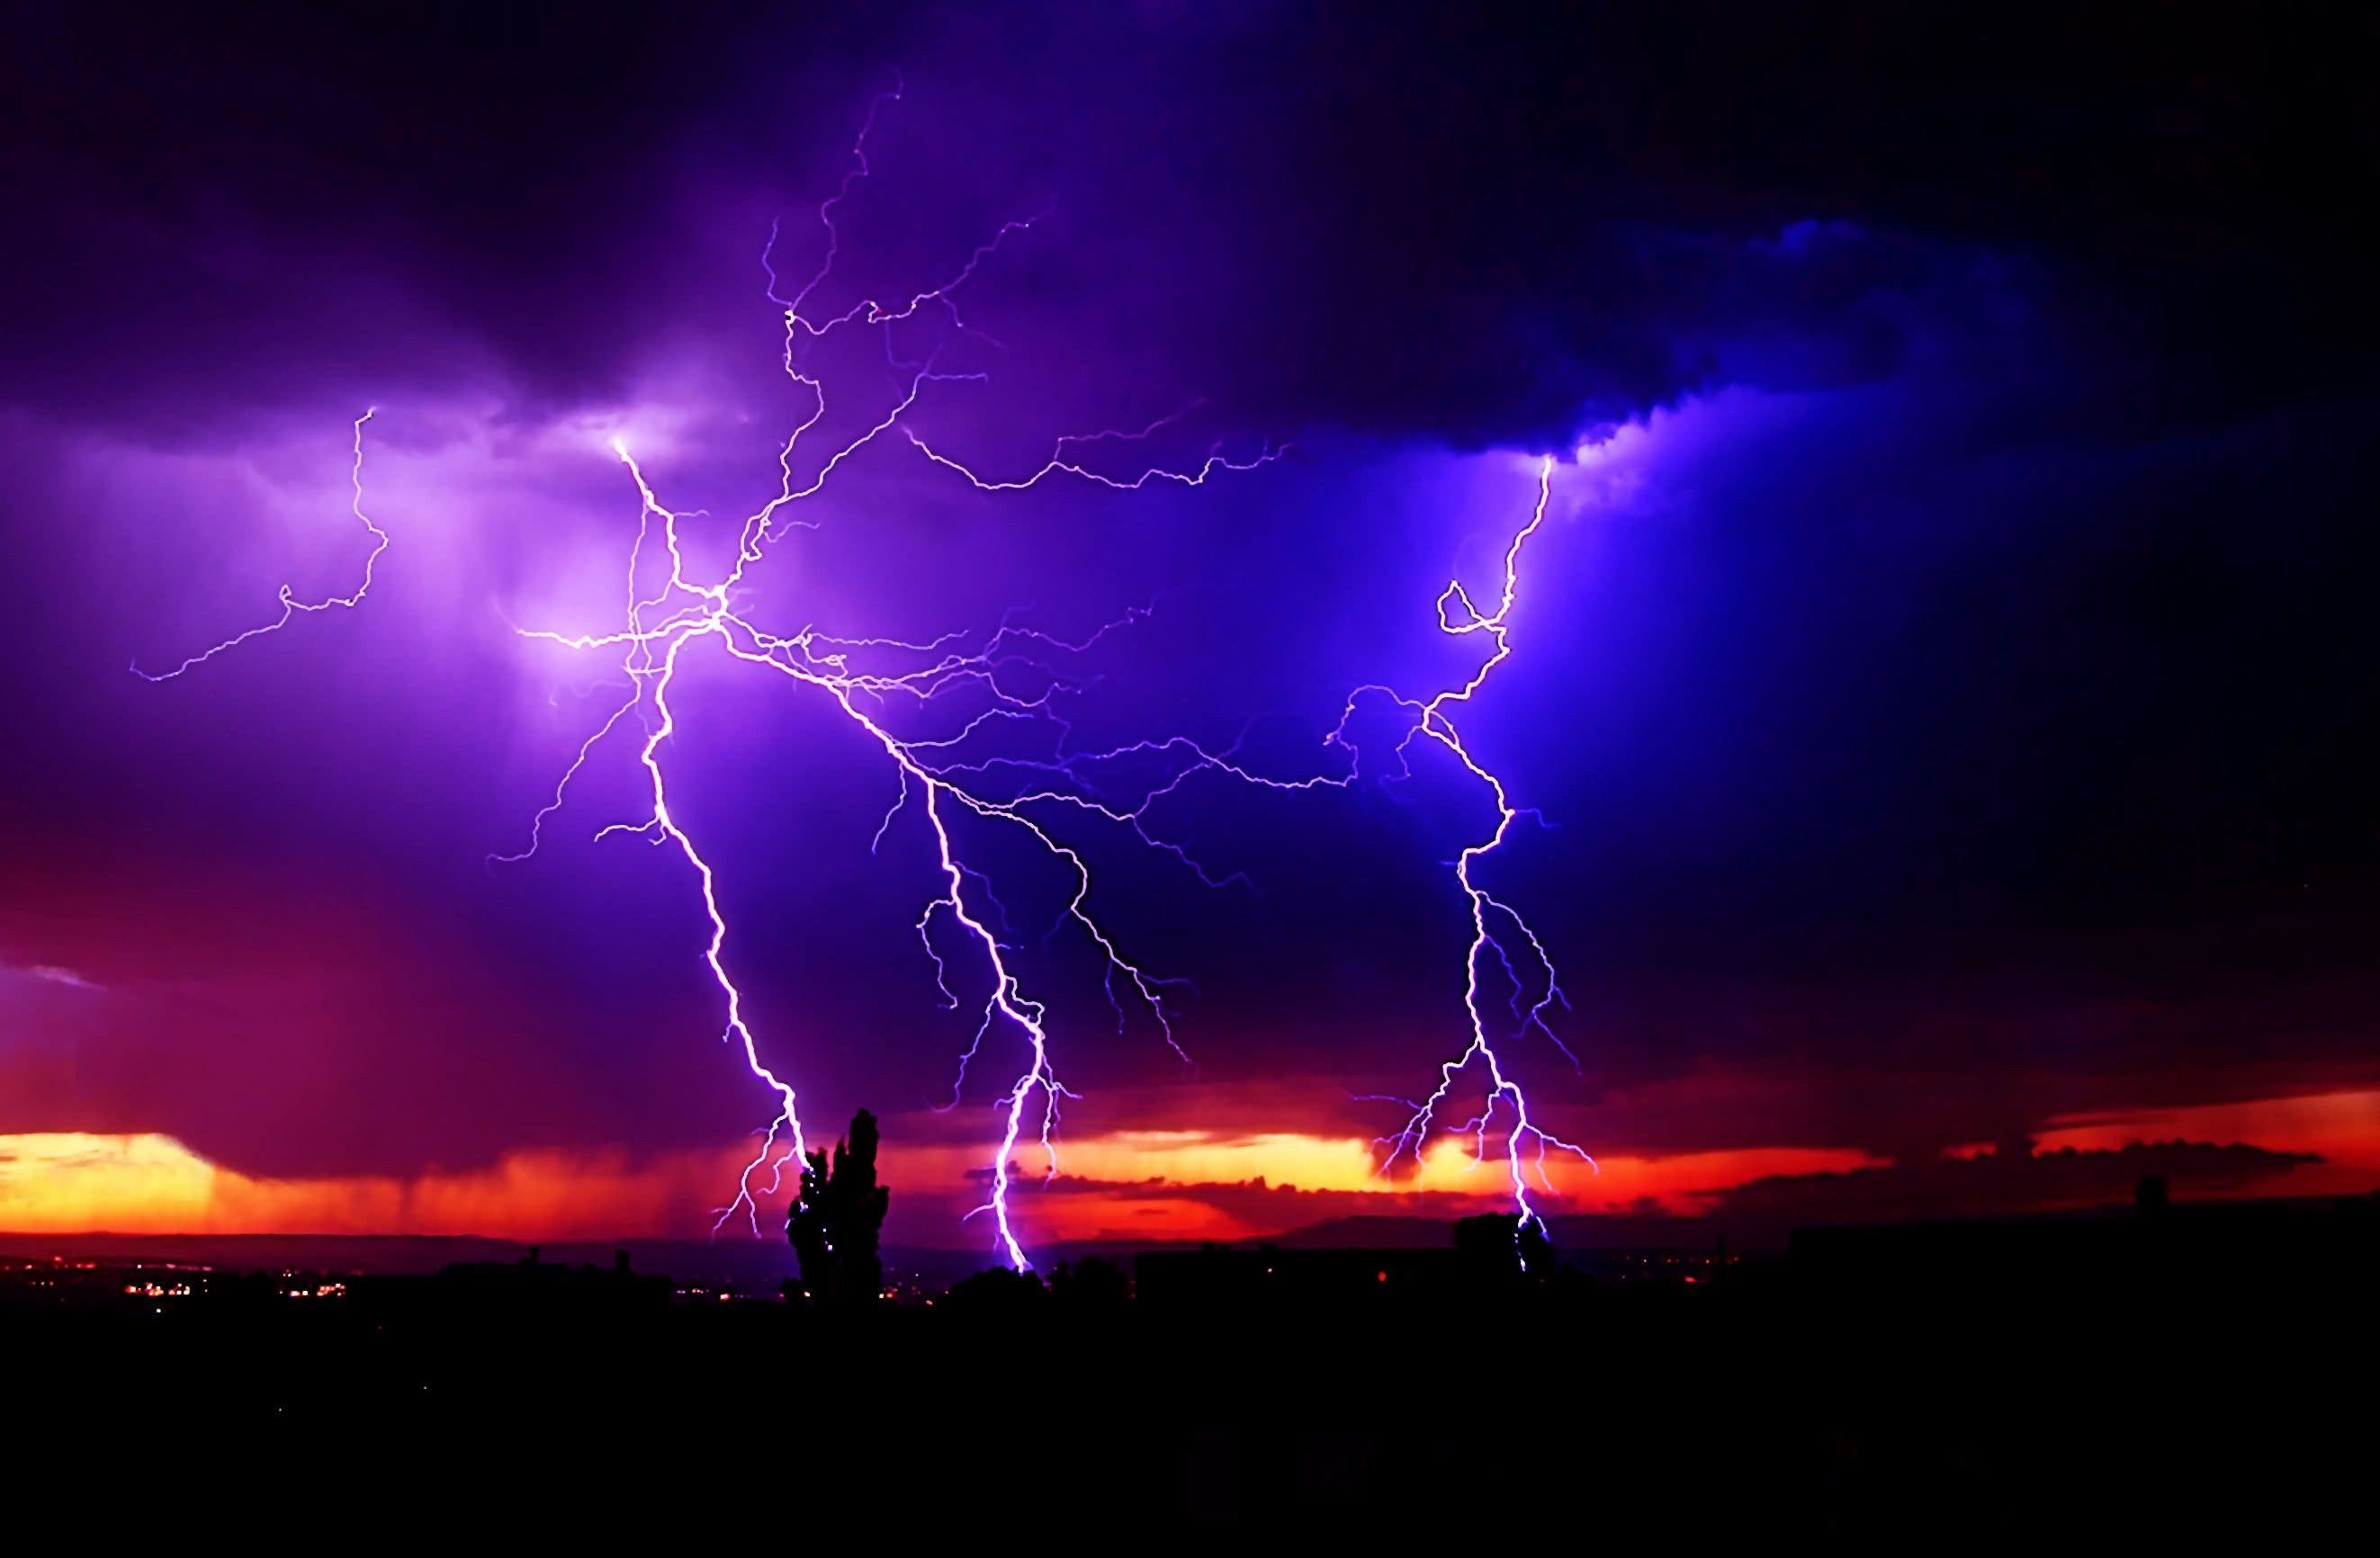 Free Hd Lightning Pictures Wallpapers - Thunder & Lightning , HD Wallpaper & Backgrounds